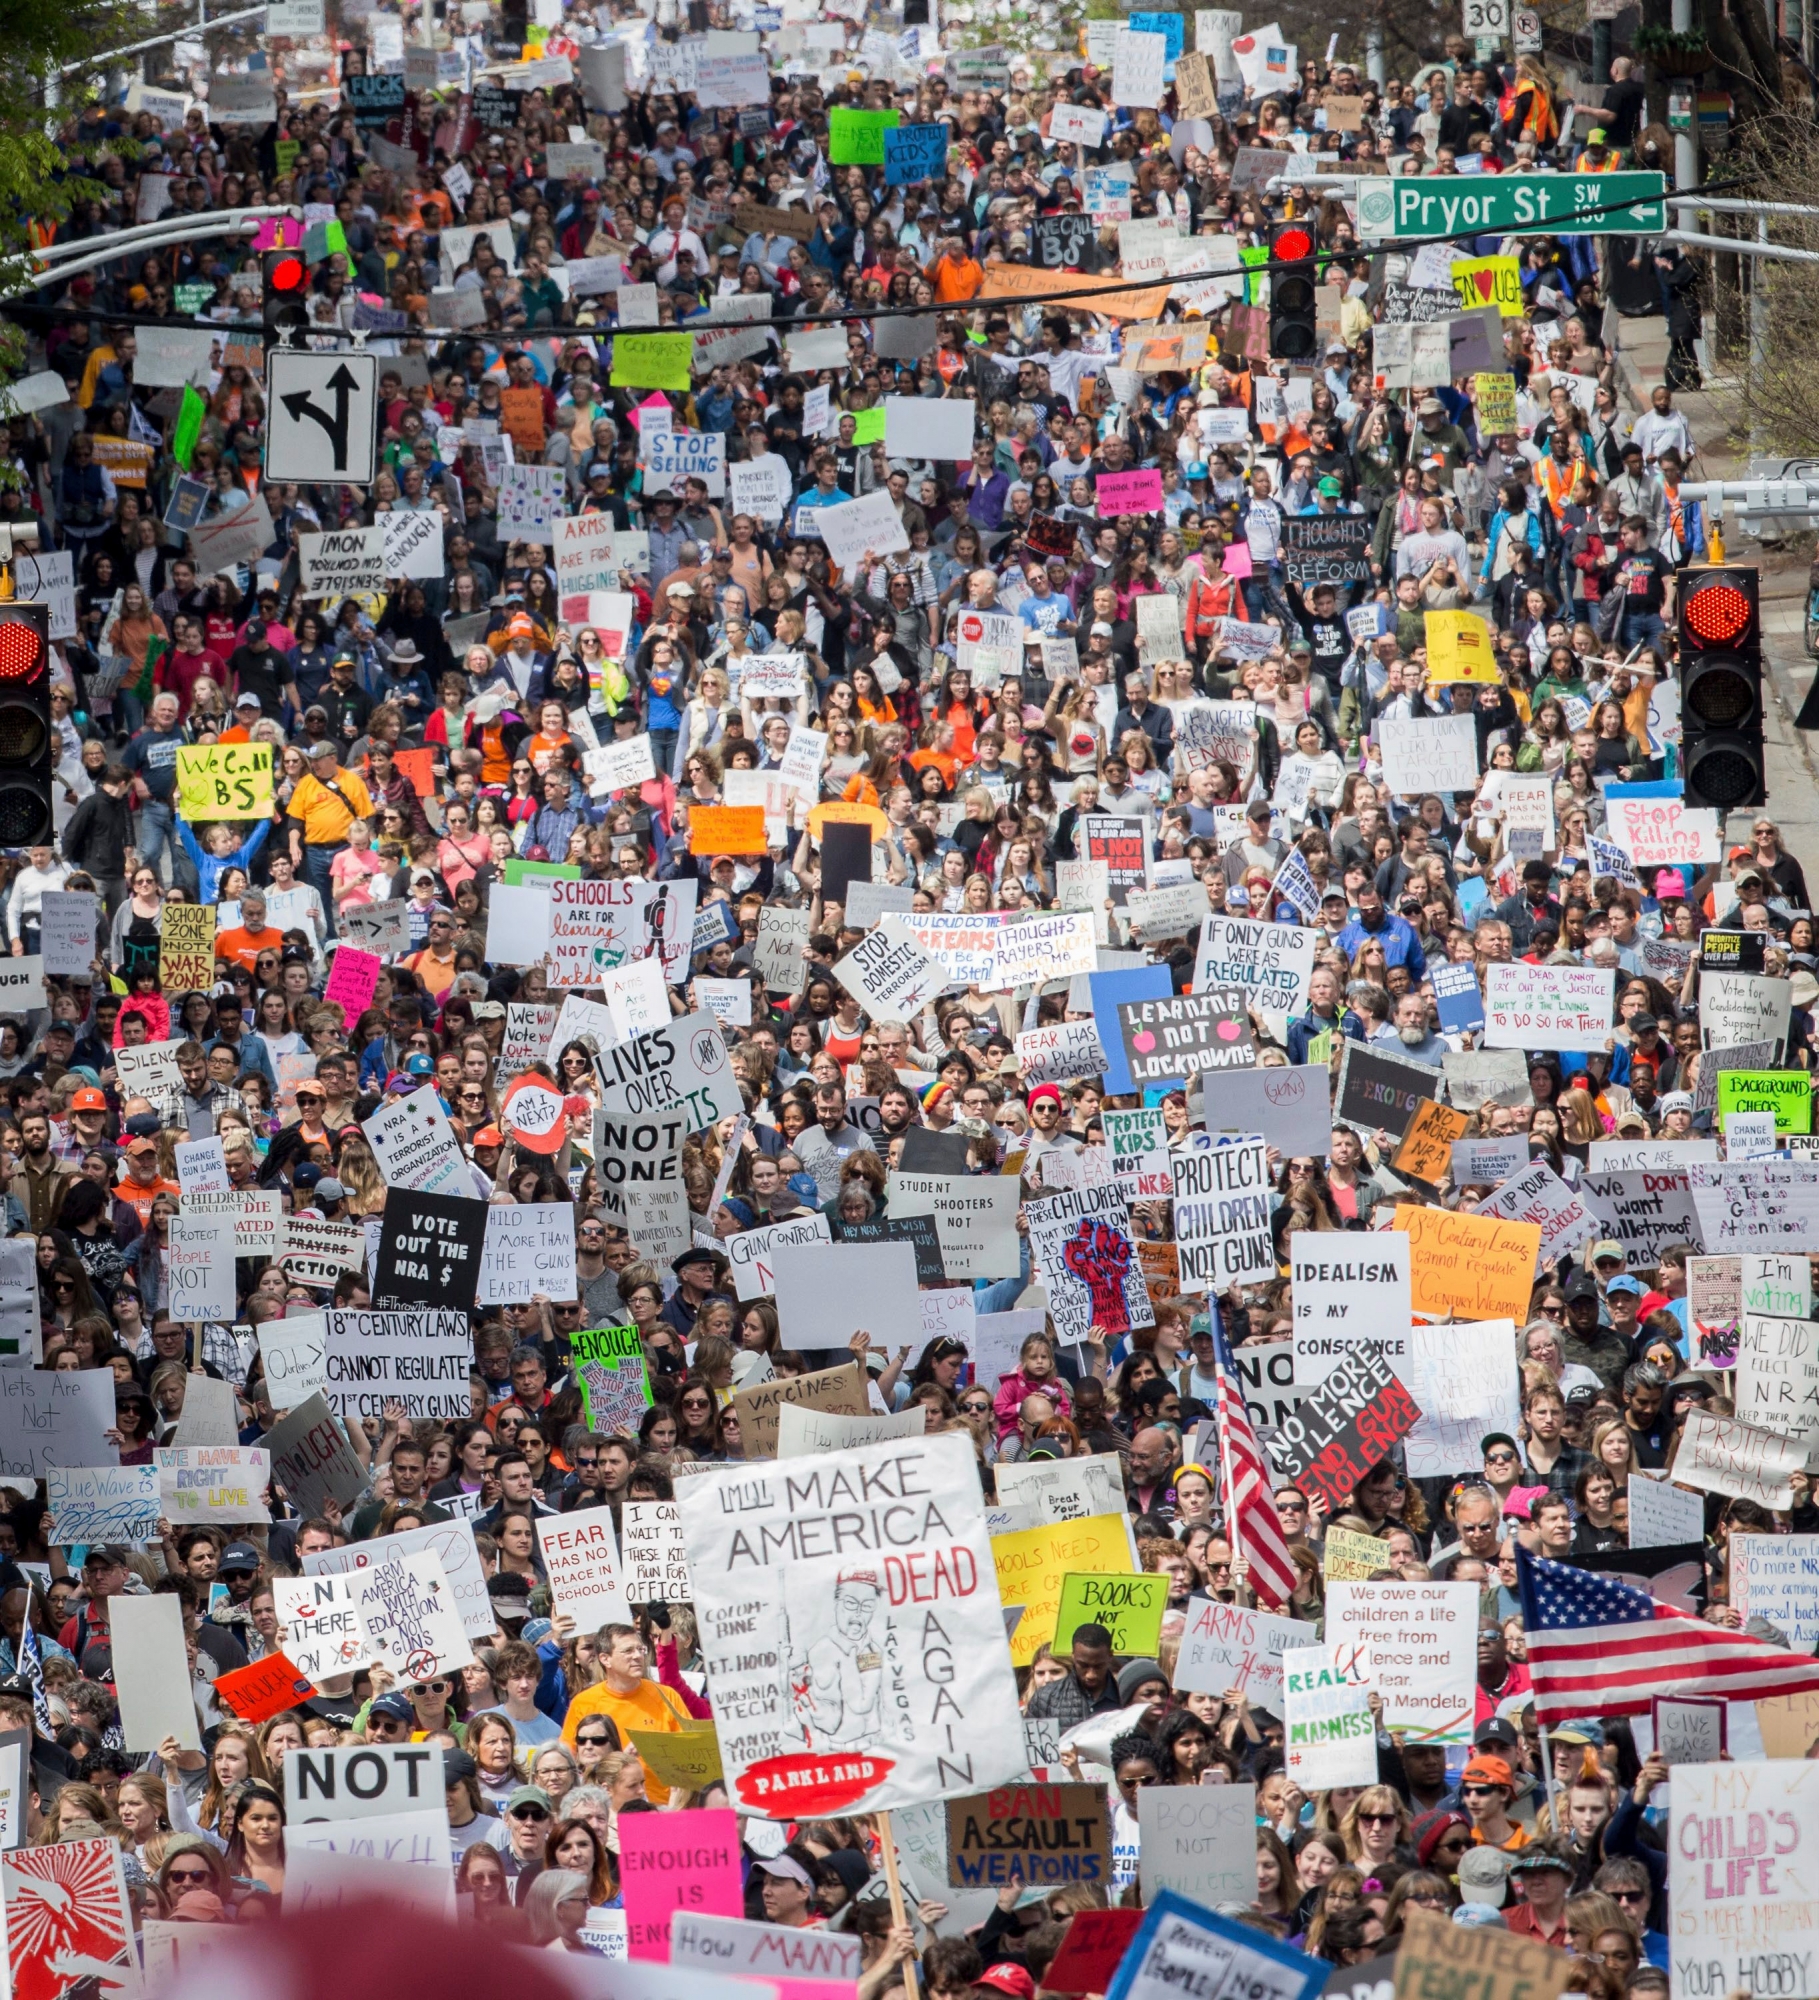 A large crowd fills the streets during the "March For Our Life" Atlanta rally Saturday, March 24, 2018. The Atlanta police department estimated the crowd at near 30,000 people. Students and activists across the country planned events n conjunction with a Washington march spearheaded by teens from Marjory Stoneman Douglas High School in Parkland, Fla., where 17 people were killed in February  (Steve Schaefer/Atlanta Journal-Constitution via AP) Student Gun Protests Atlanta